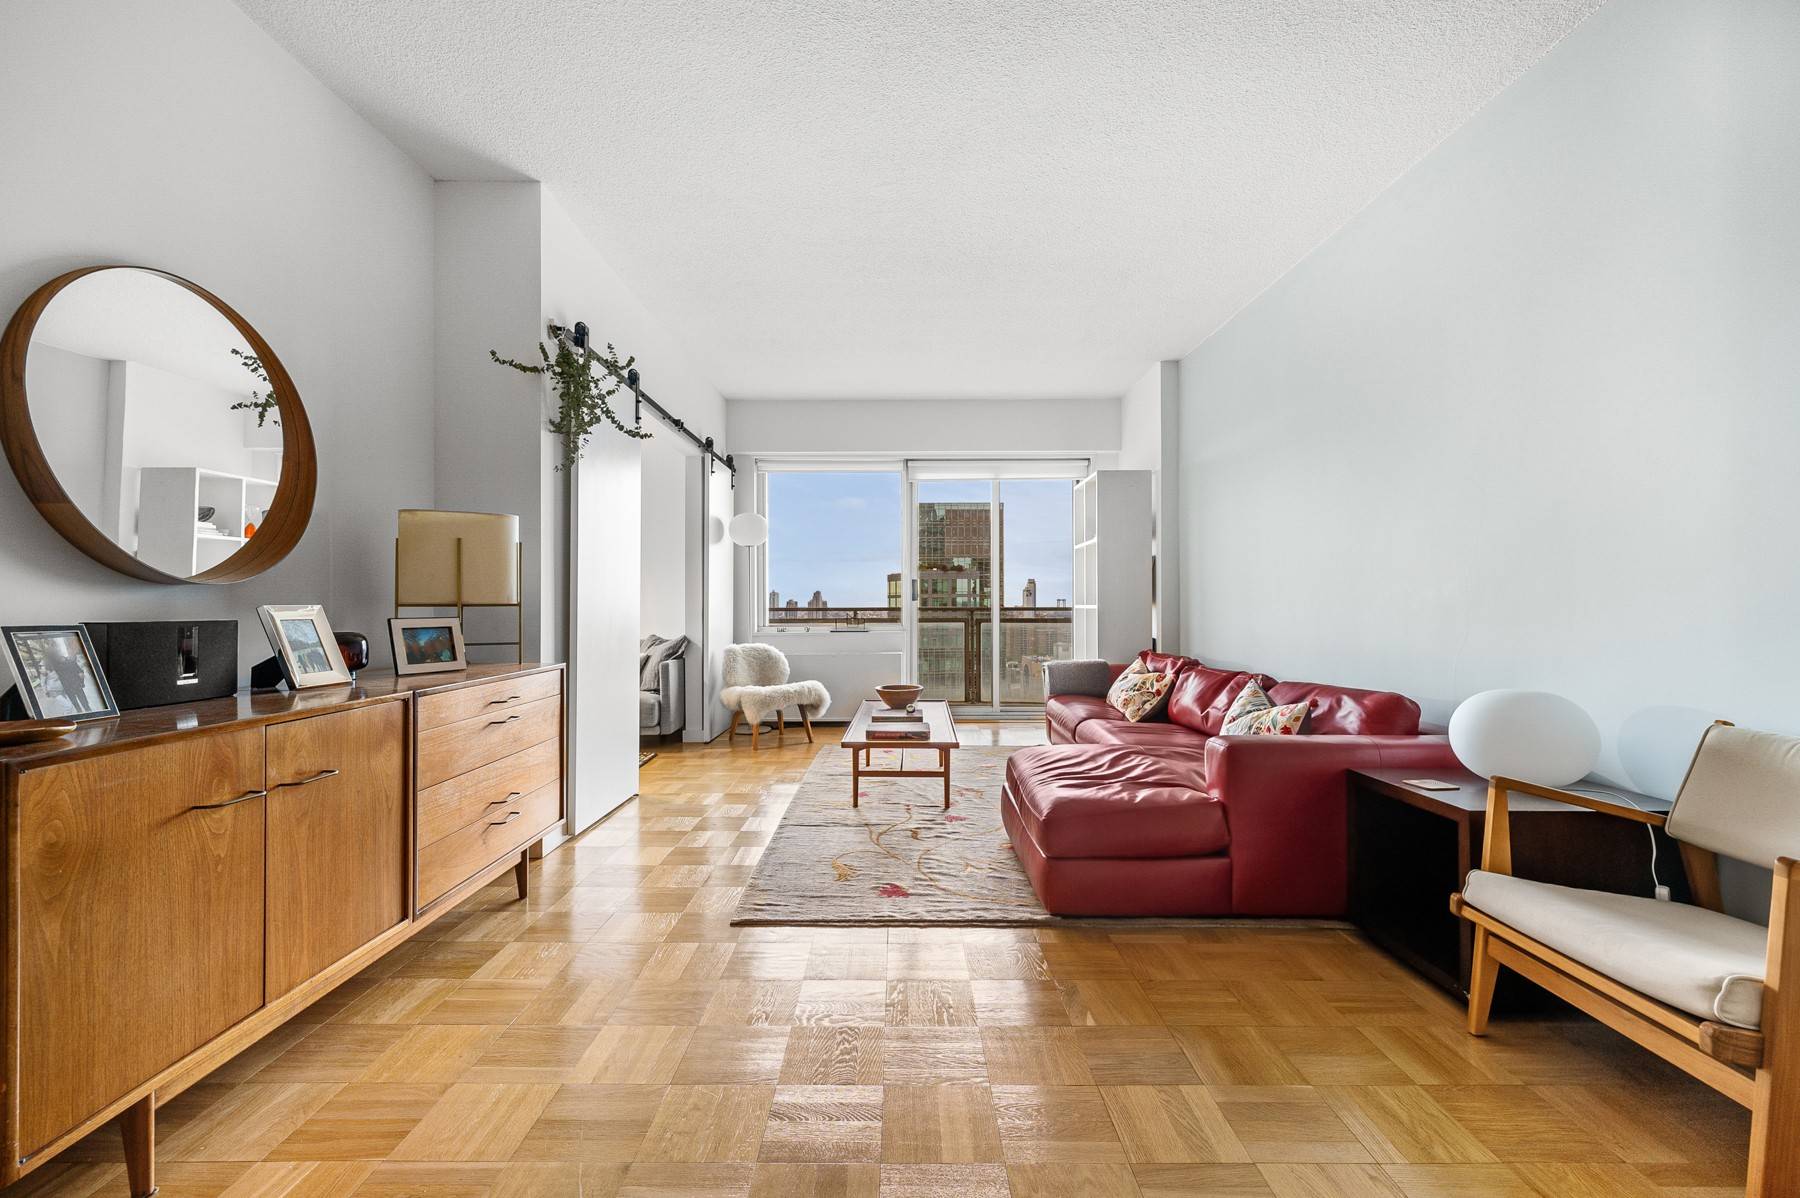 VIEWS ! VIEWS ! VIEWS ! This spacious CONVERTIBLE 3 corner apartment in Greenwich Village boasts massive open and clear views of the city and skylight, making it a rare ...